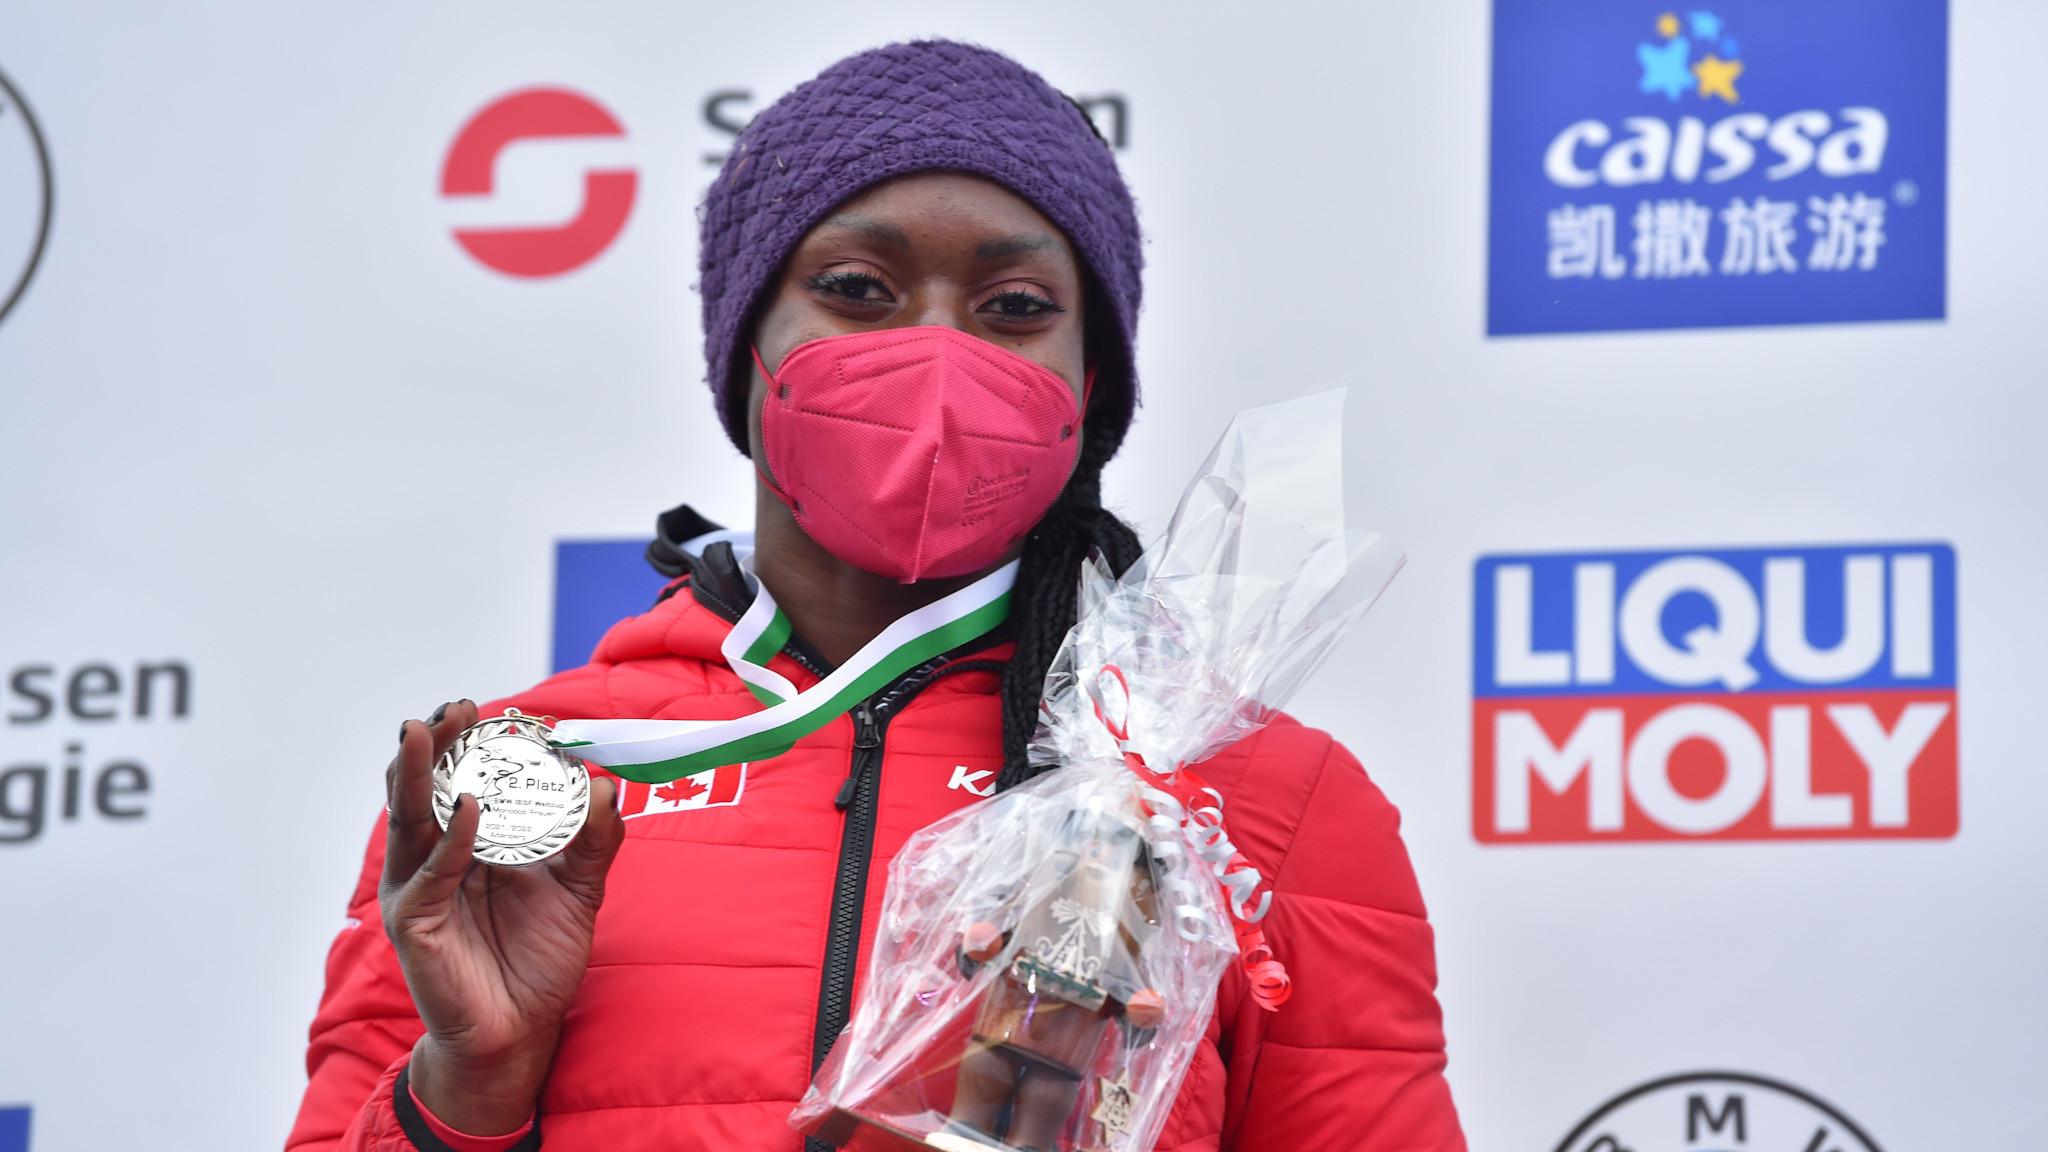 Cynthia Appiah finished second in the Women's Monobob World Series round in Altenberg, 0.06 seconds behind Humphries ©IBSF/Viesturs Lacis 